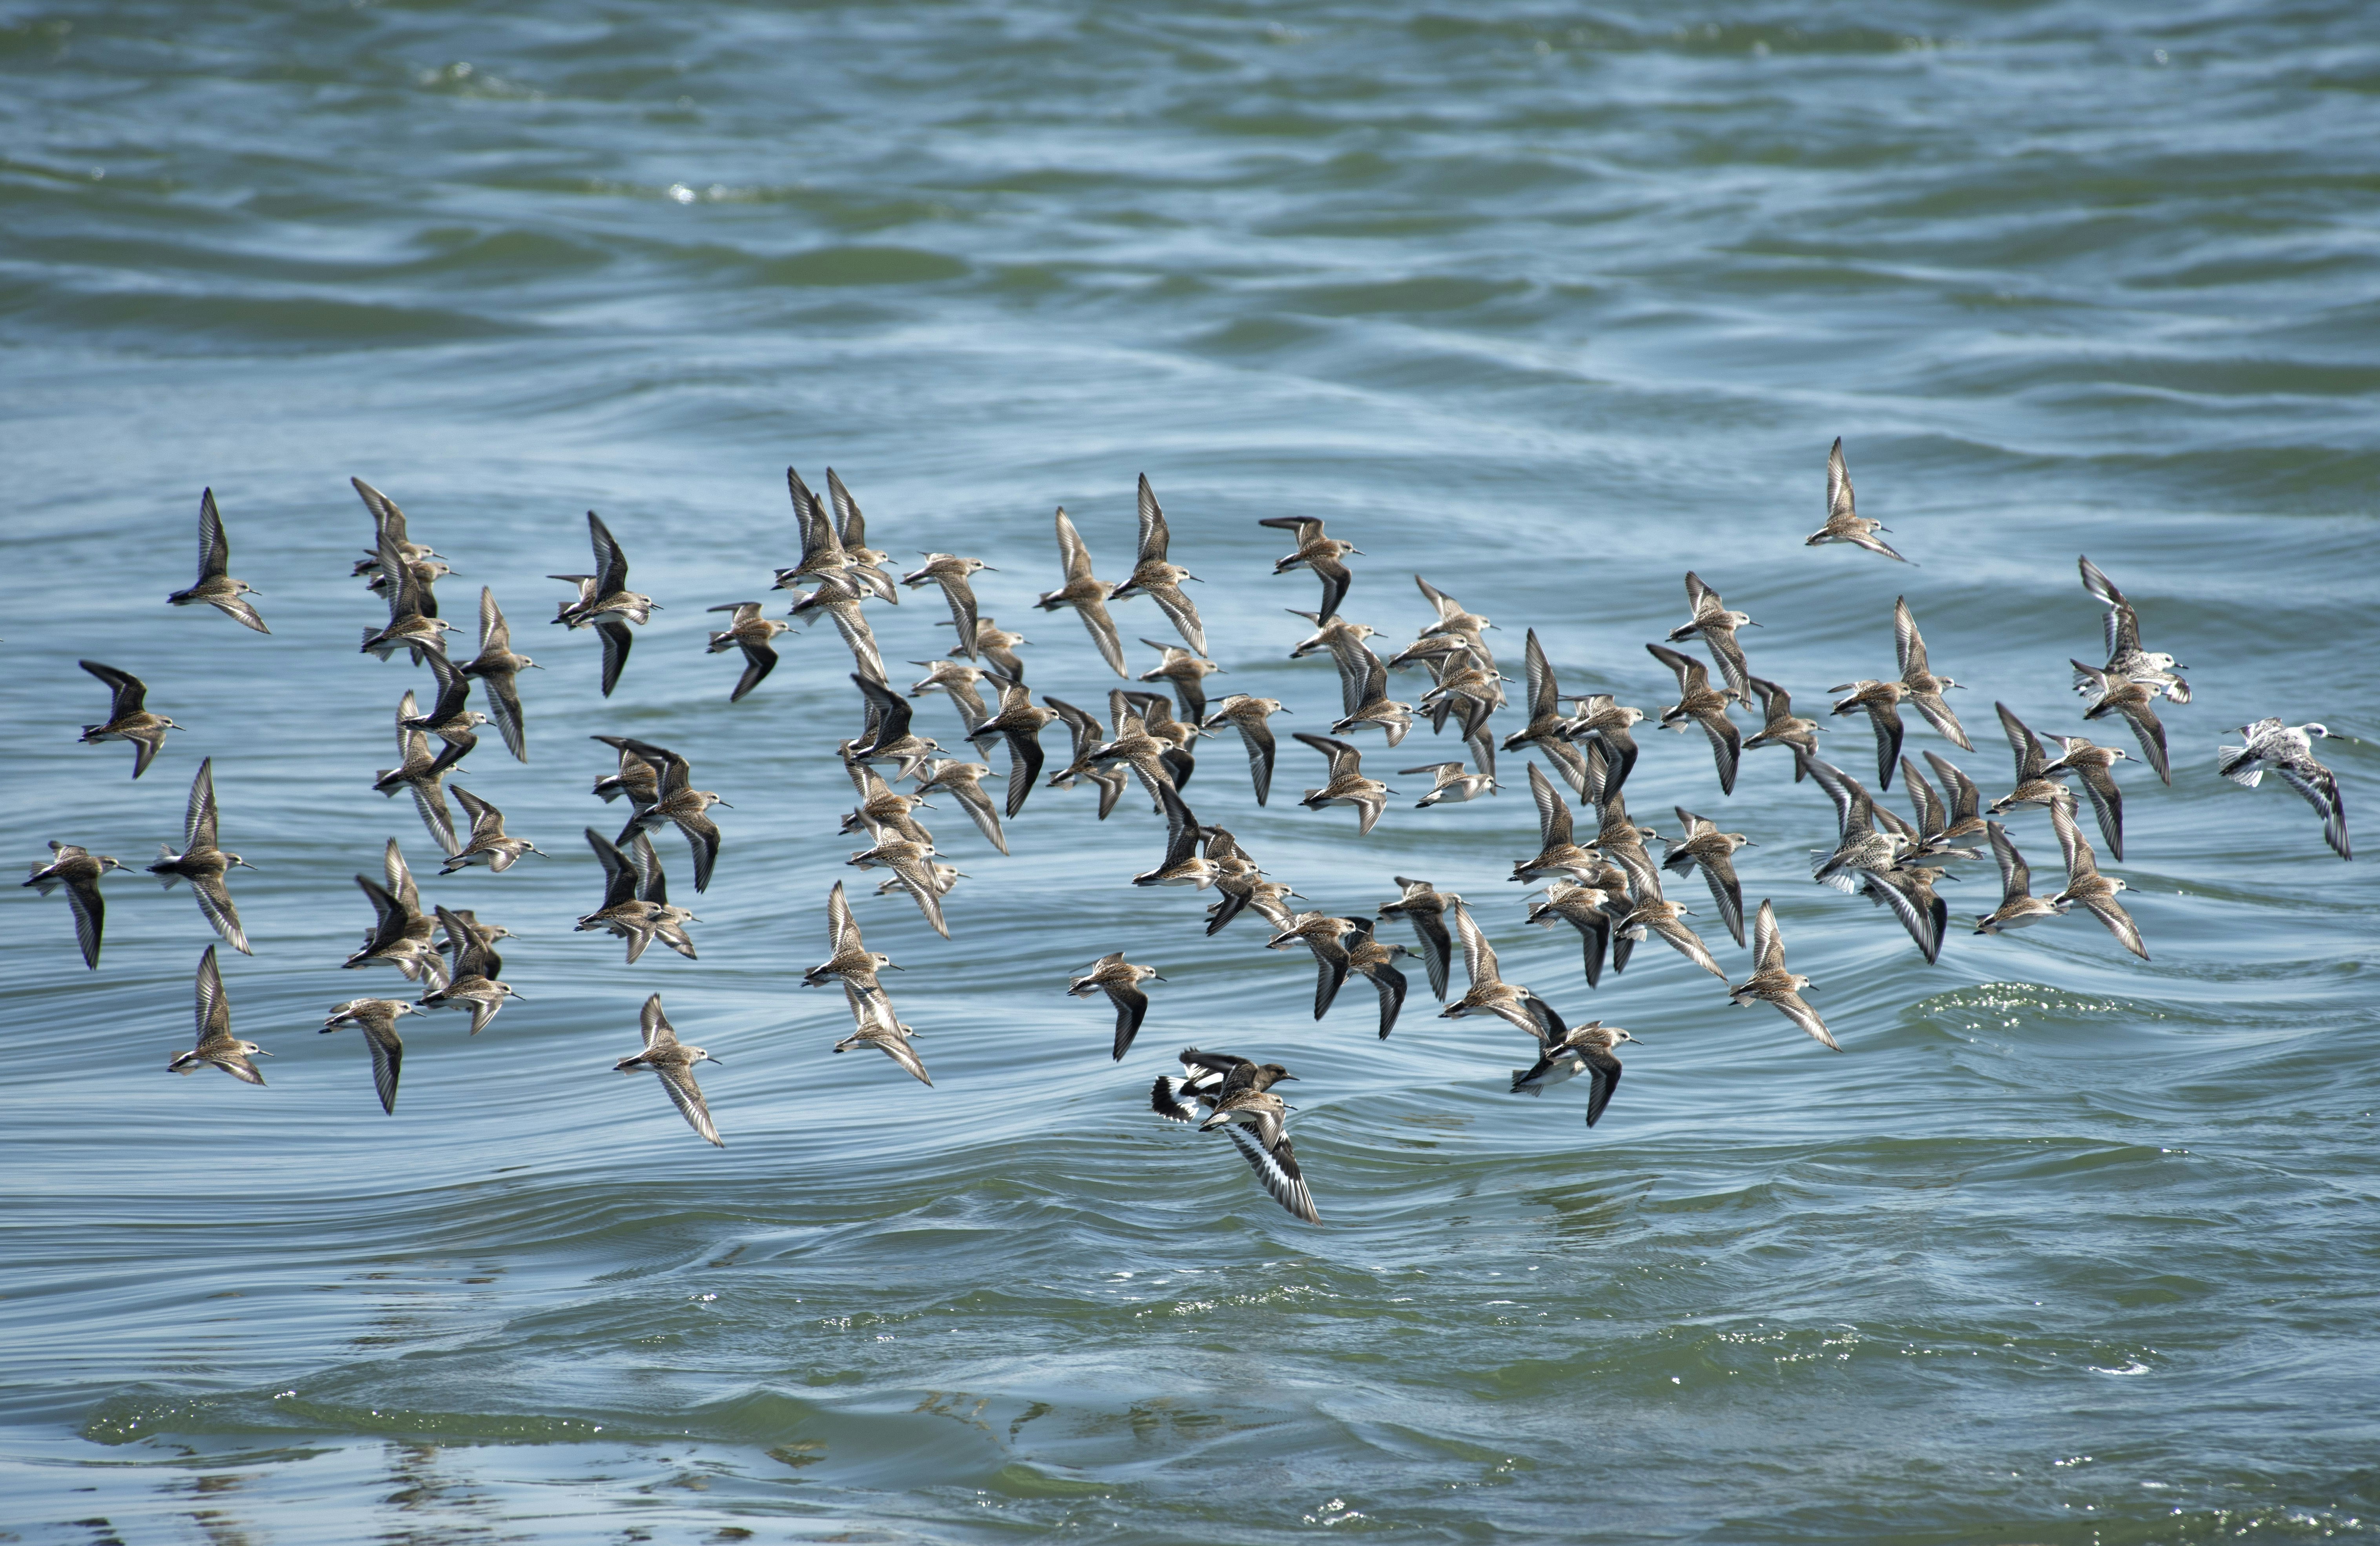 small flock of sandpipers in flight